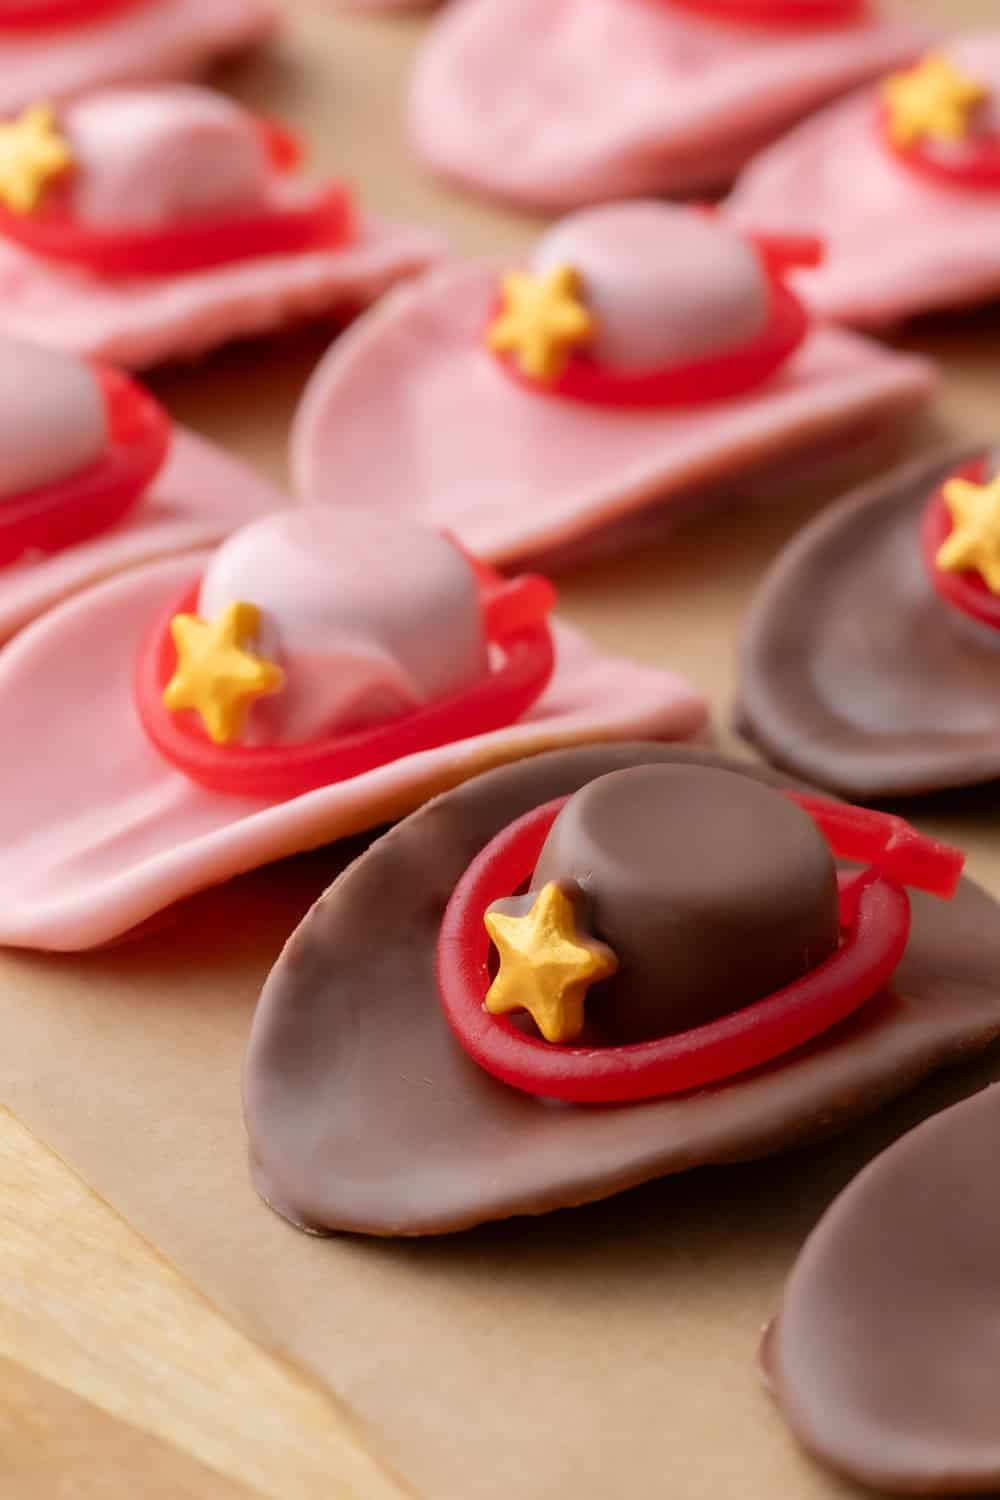 Hats Off To These Chocolate Cowboy Hats